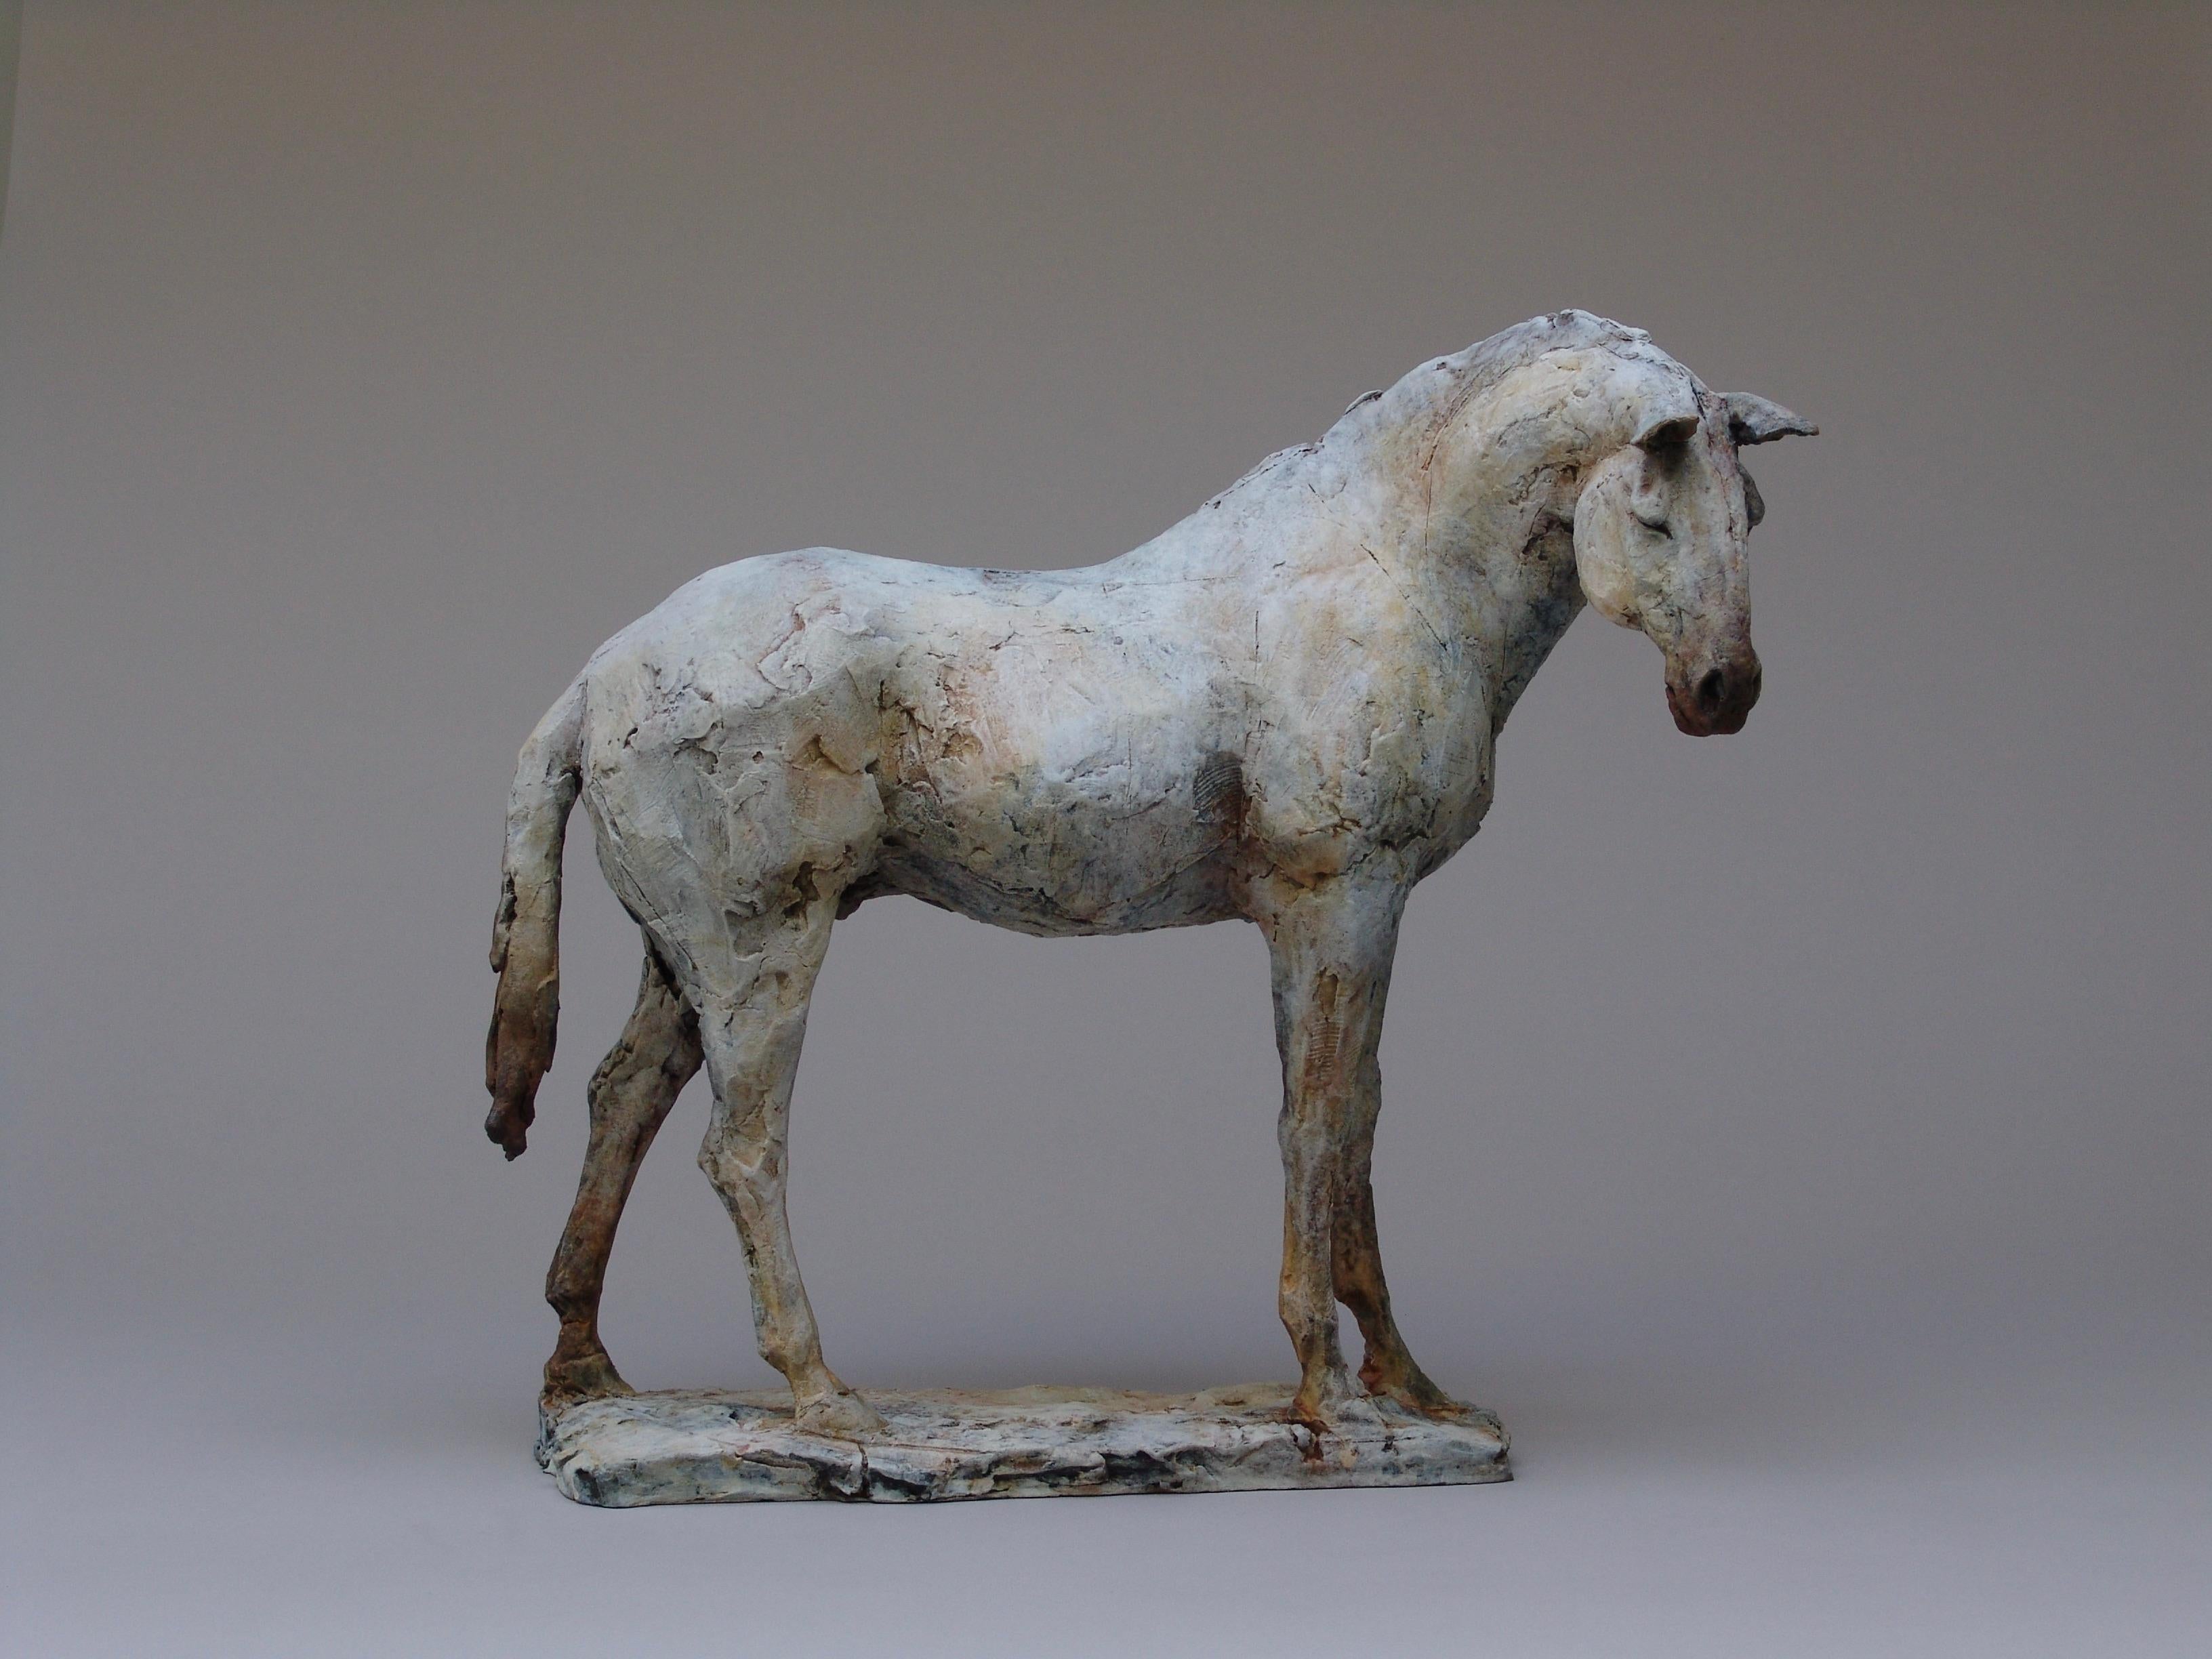 Nichola Theakston (1967) has established herself as one of the UK’s foremost contemporary sculptors working within the animal genre. 

With the ''Resting with Ancients'' Nichola shows how exquisite she can capture the feelings and expressions in an